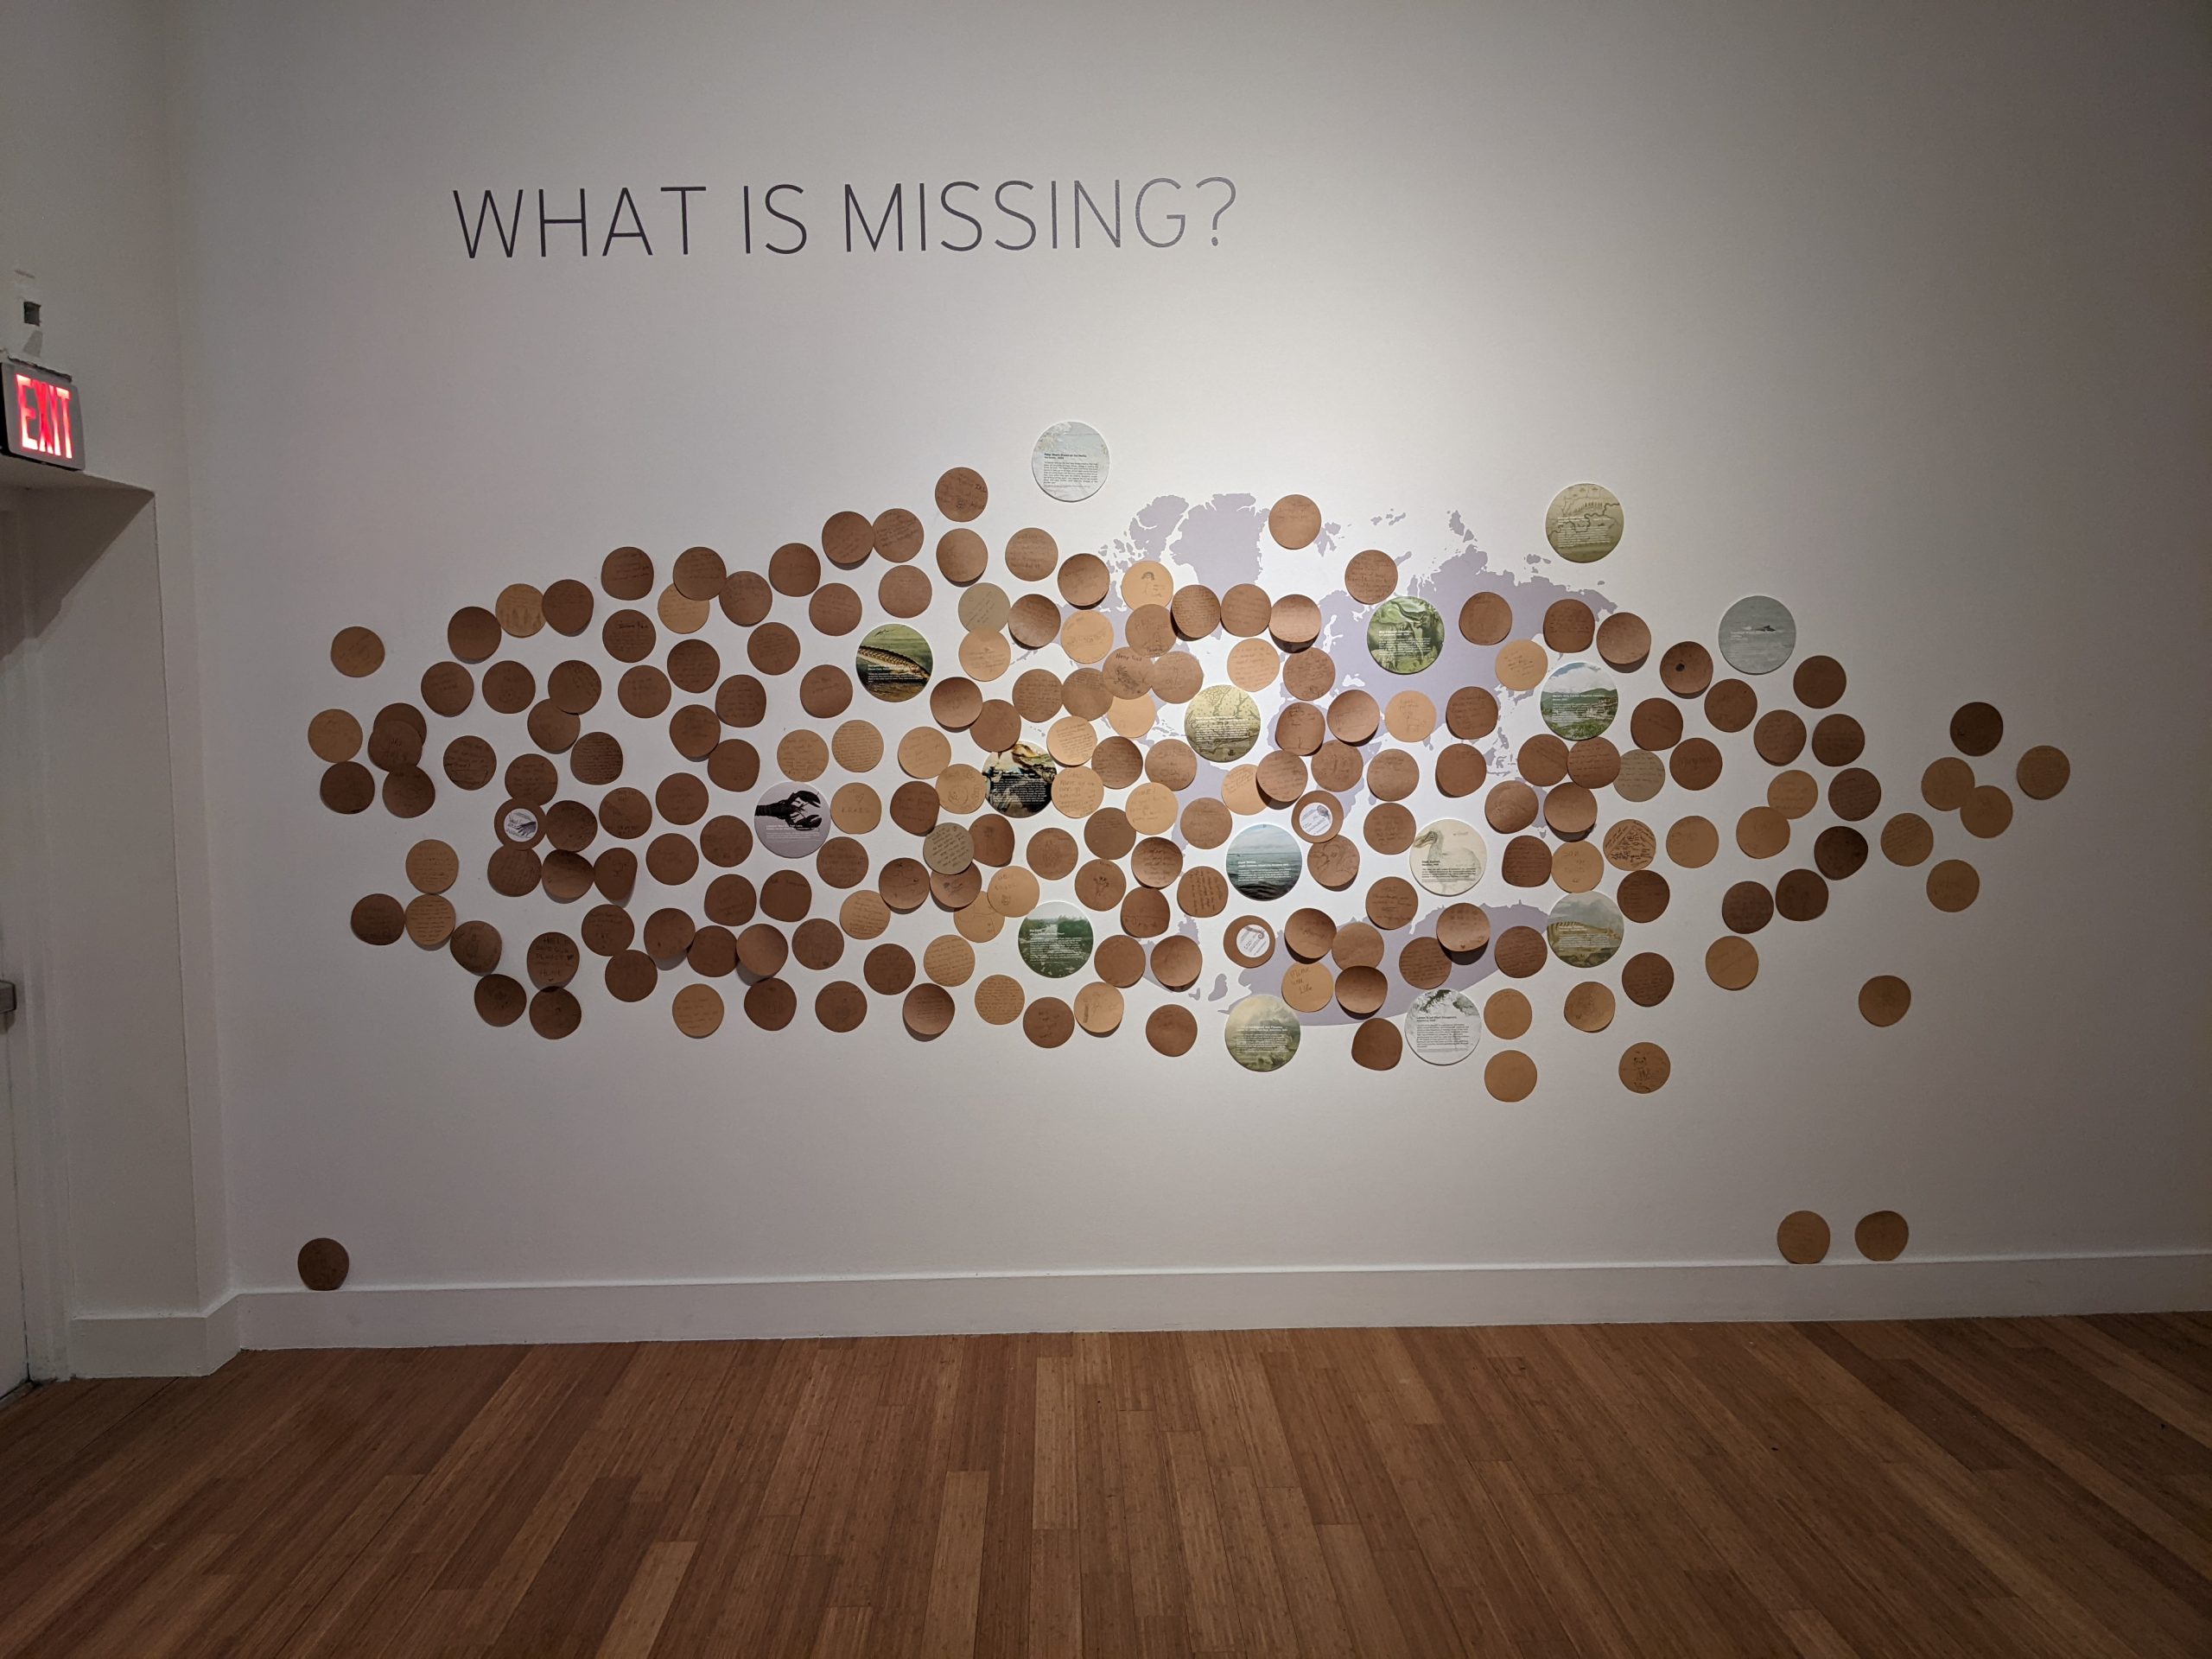 Photograph of museum gallery installation consisting of multiple decorated circles of brown paper, above which are the words "WHAT IS MISSING?"